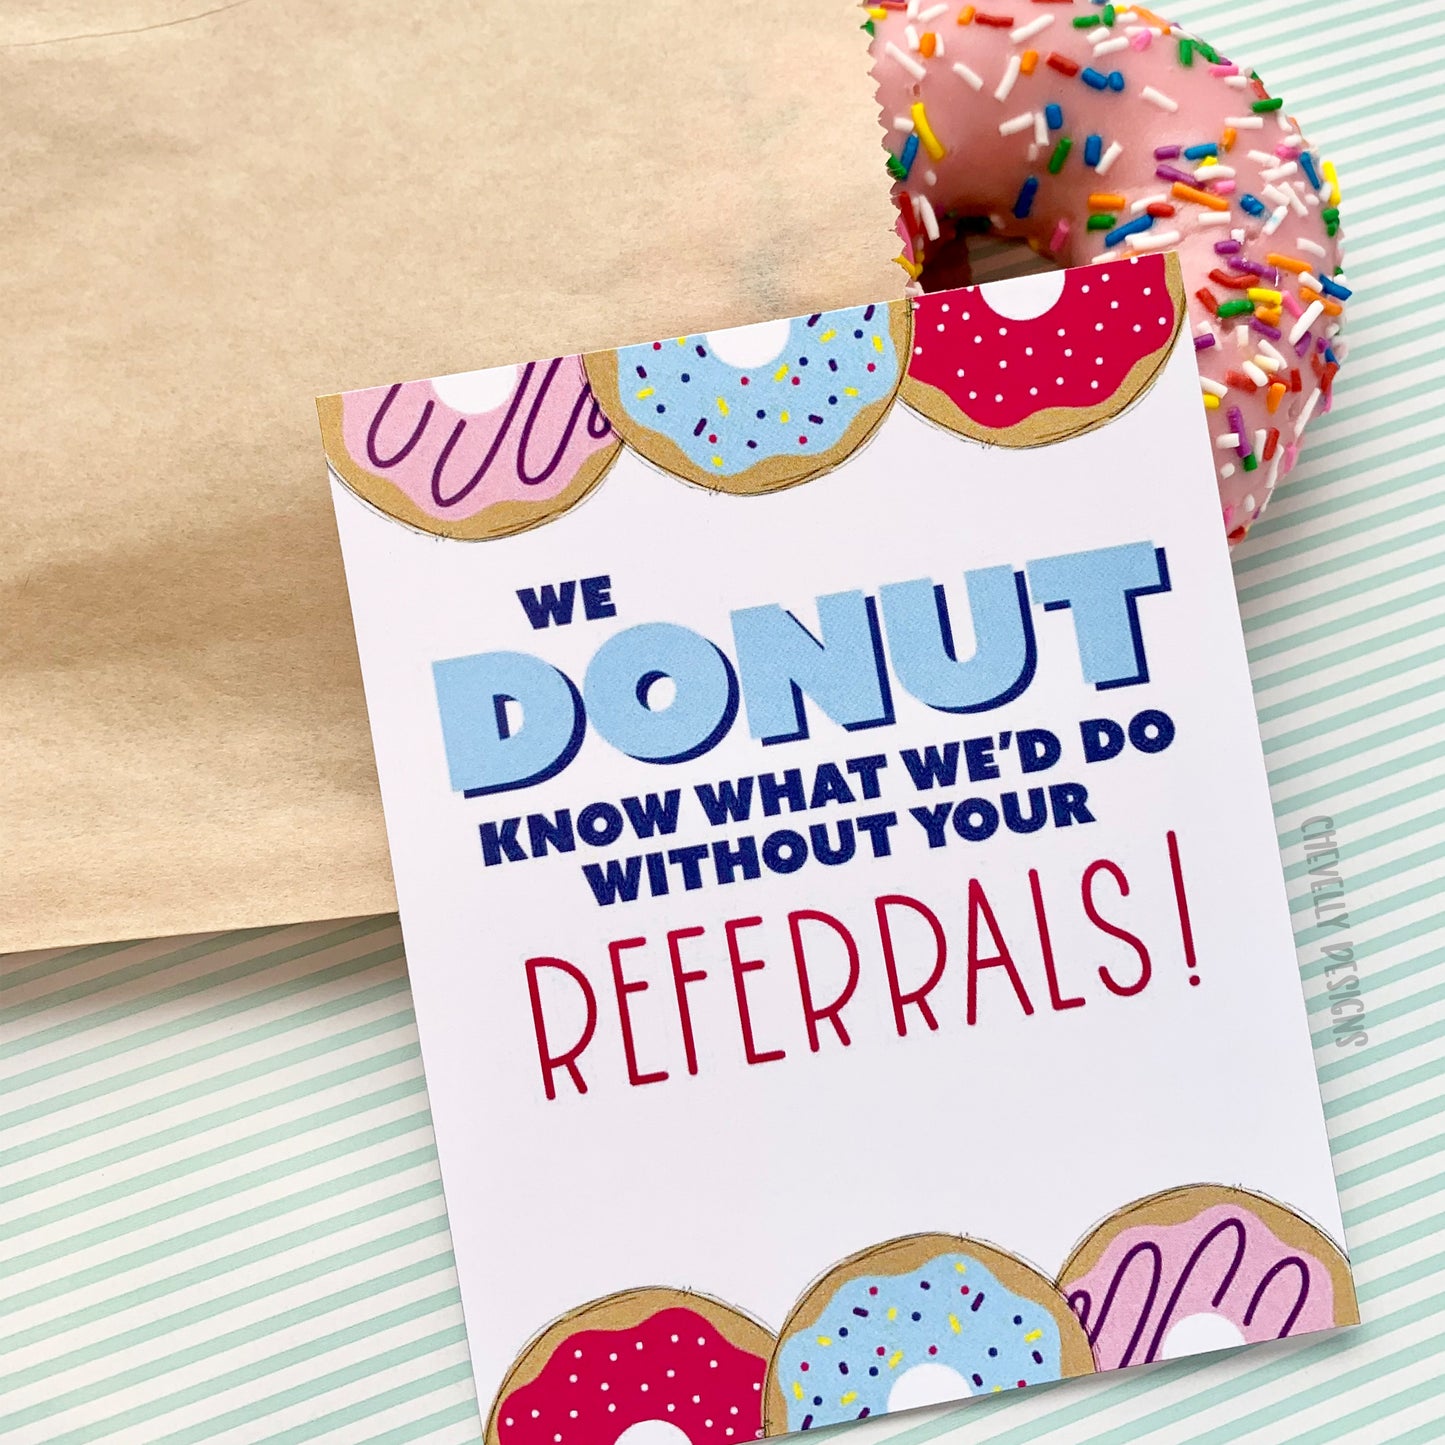 Printable Donut Referral Gift Tags for Business - INSTANT DOWNLOAD Digital Files